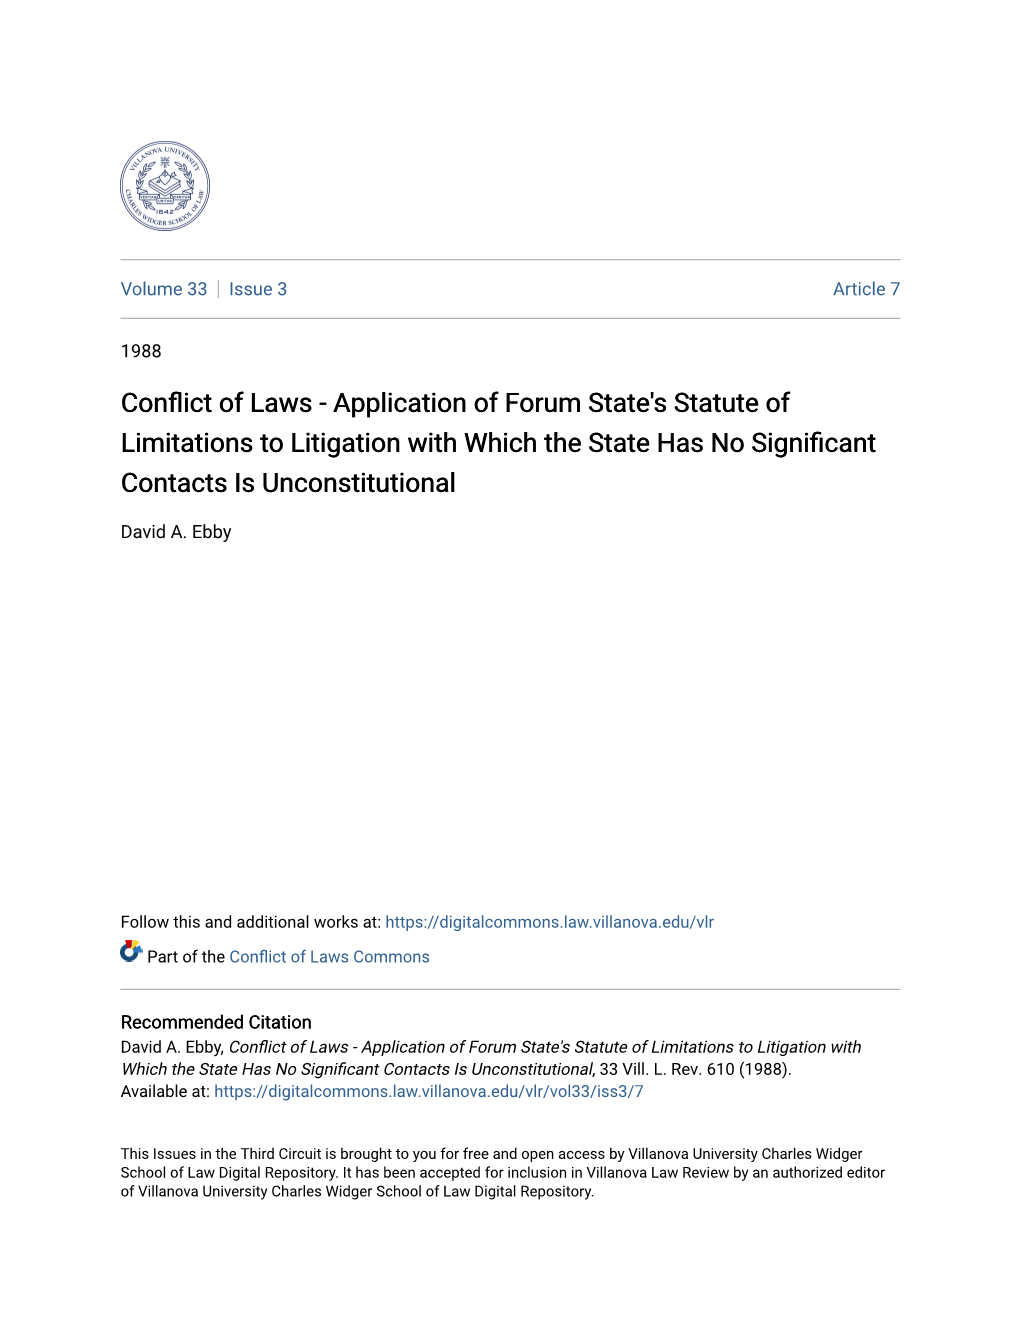 Conflict of Laws - Application of Orumf State's Statute of Limitations to Litigation with Which the State Has No Significant Contacts Is Unconstitutional